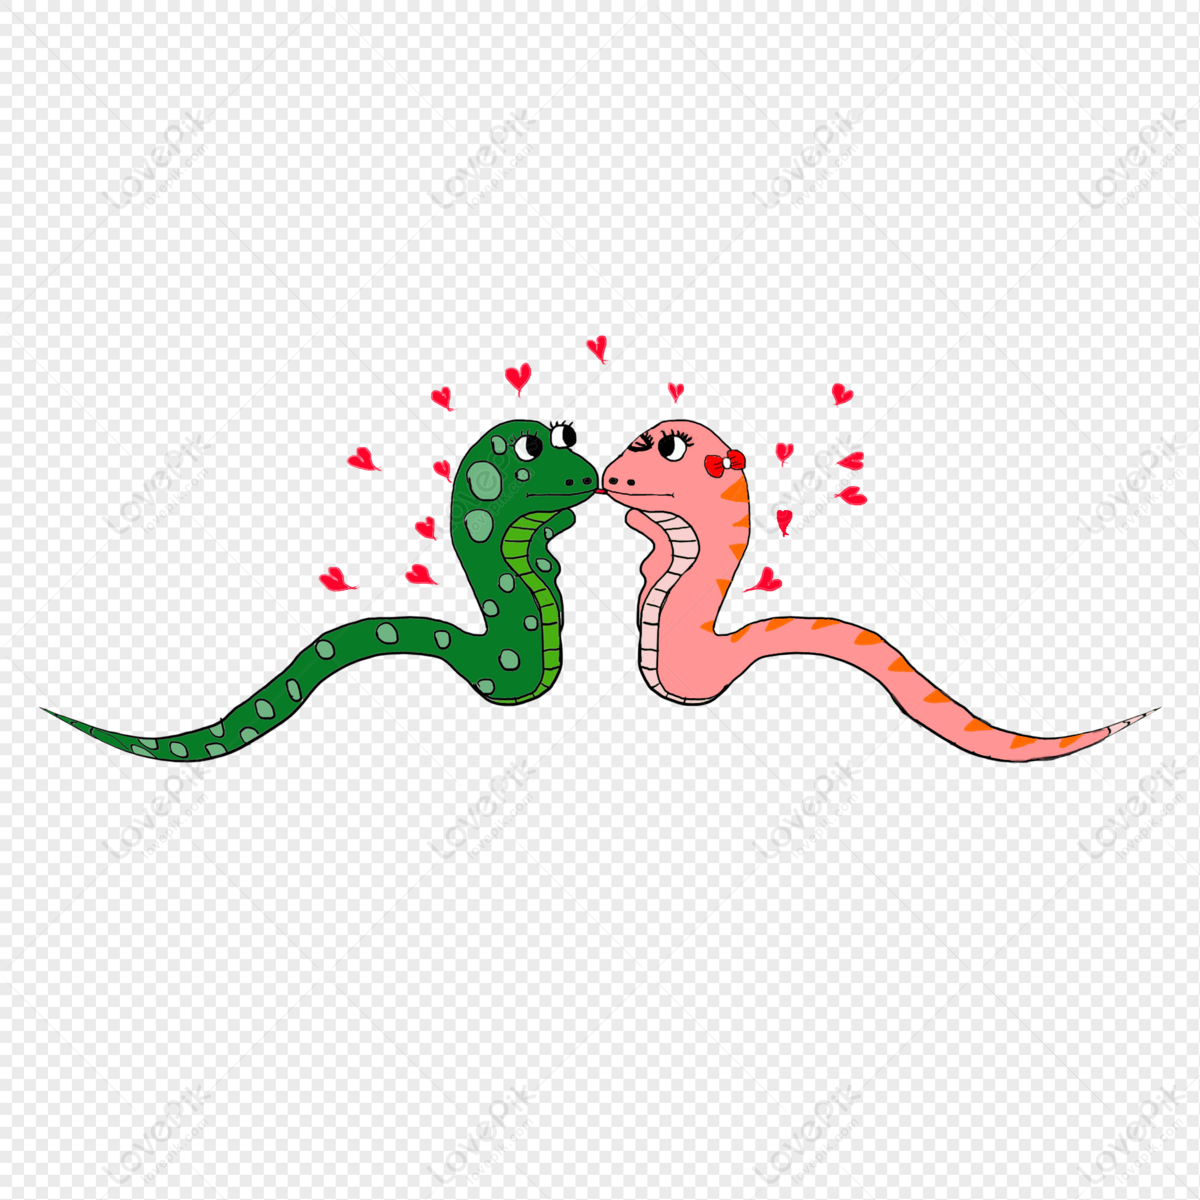 Snake PNG Transparent Image And Clipart Image For Free Download - Lovepik |  401276597